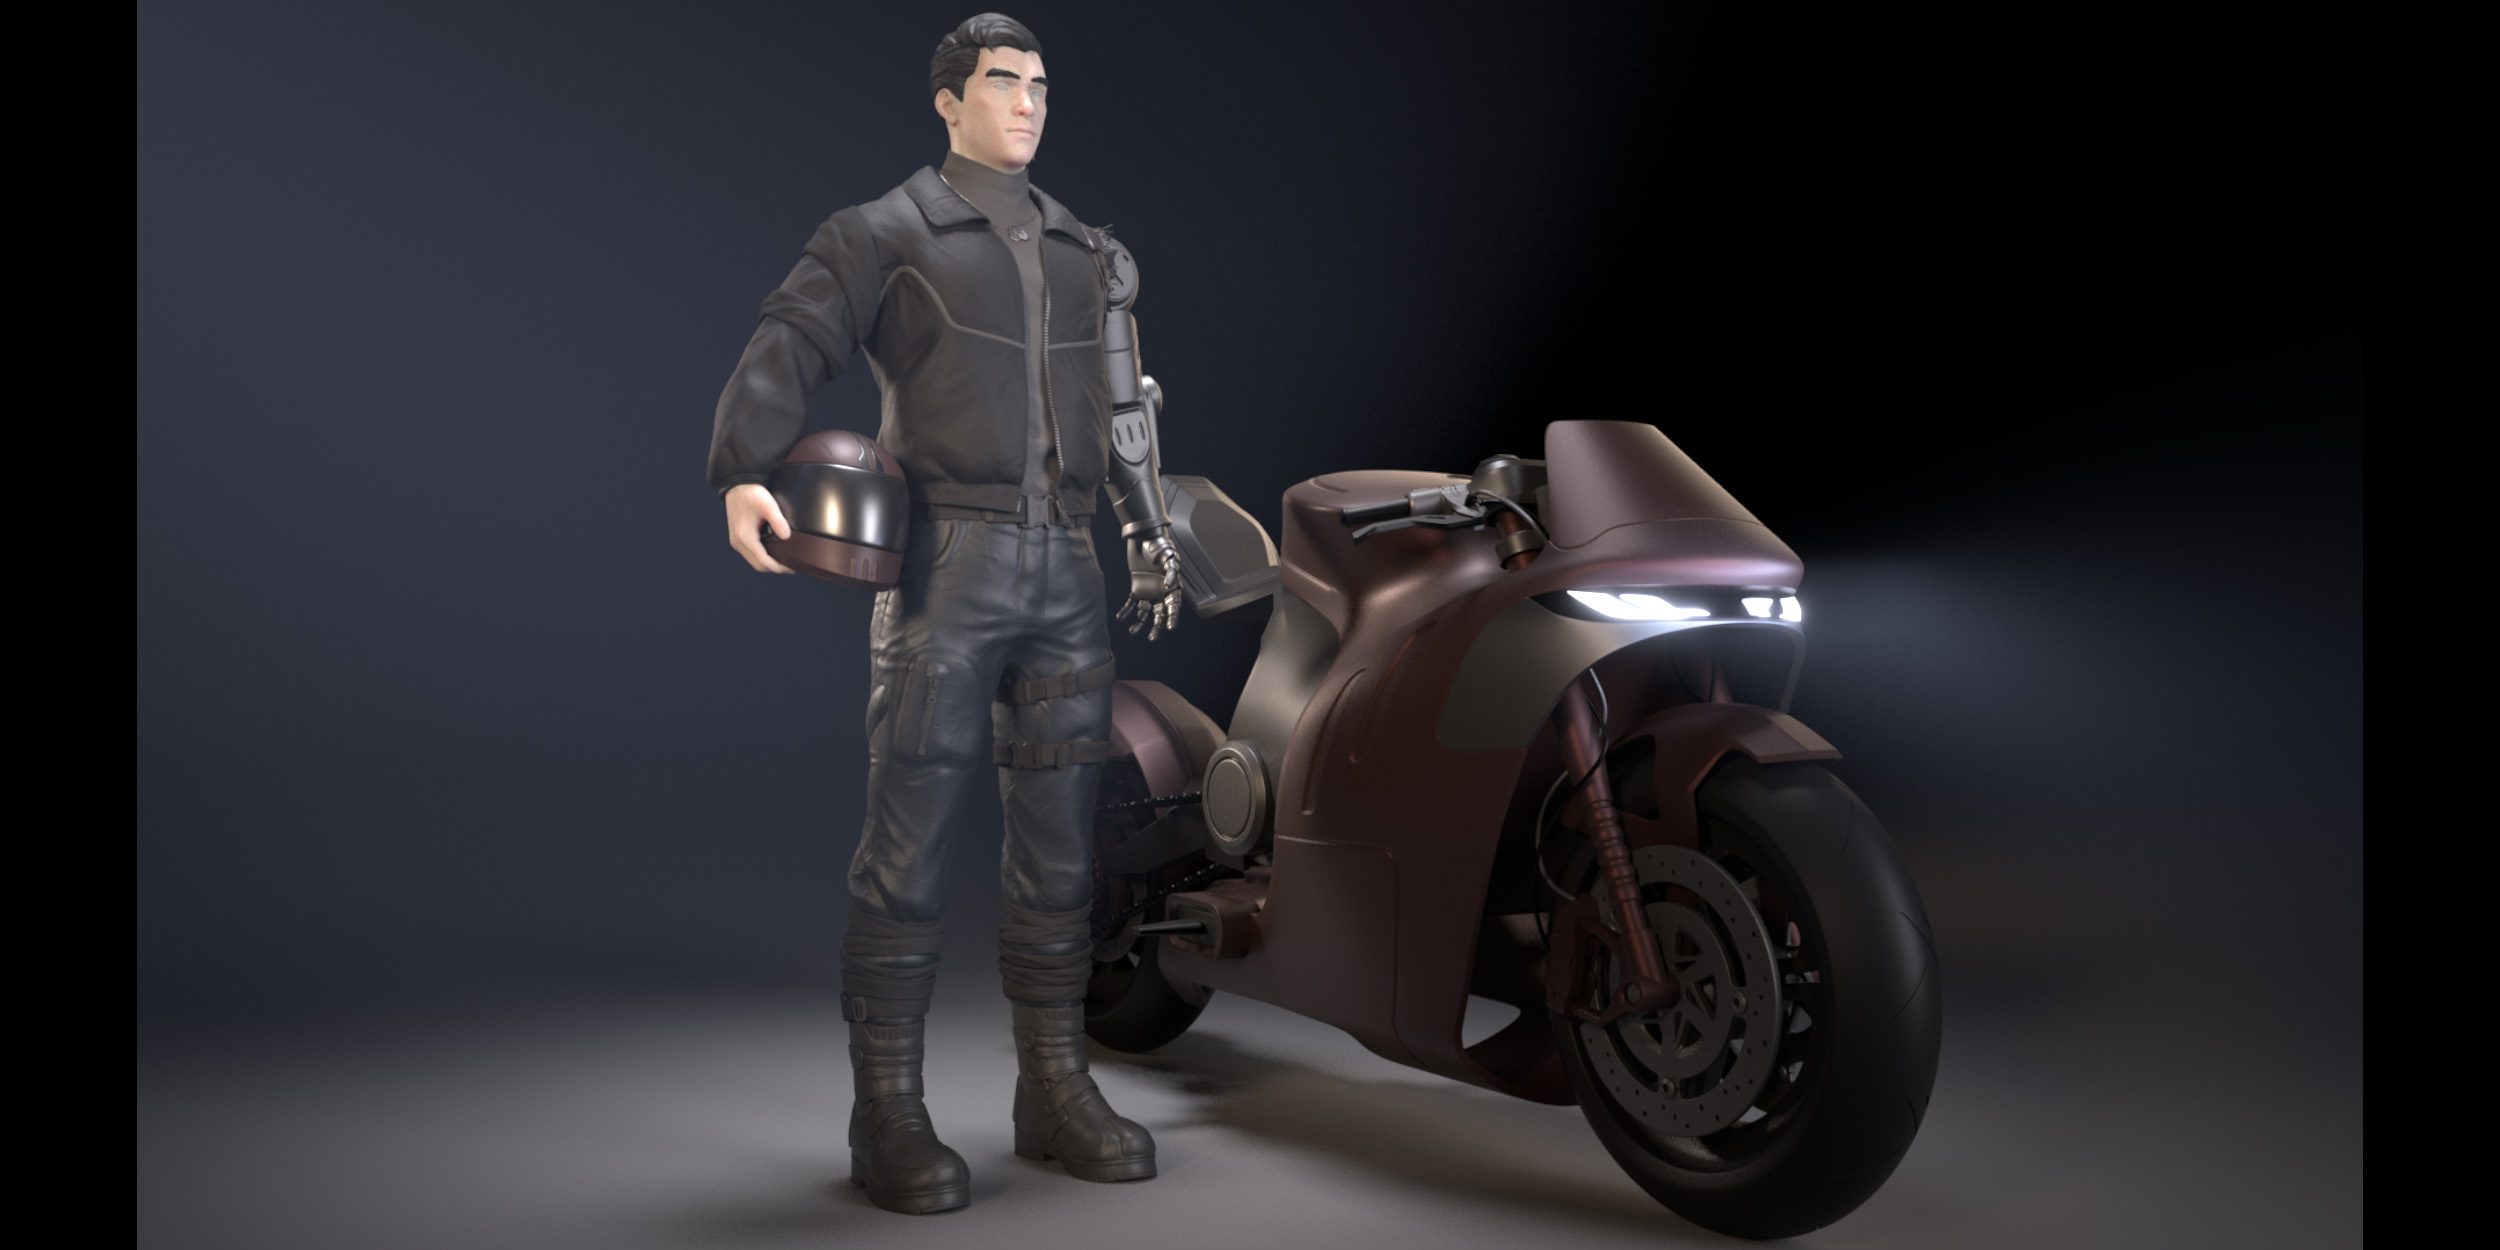 A render of a character holding a helmet standing next to a motorcycle.